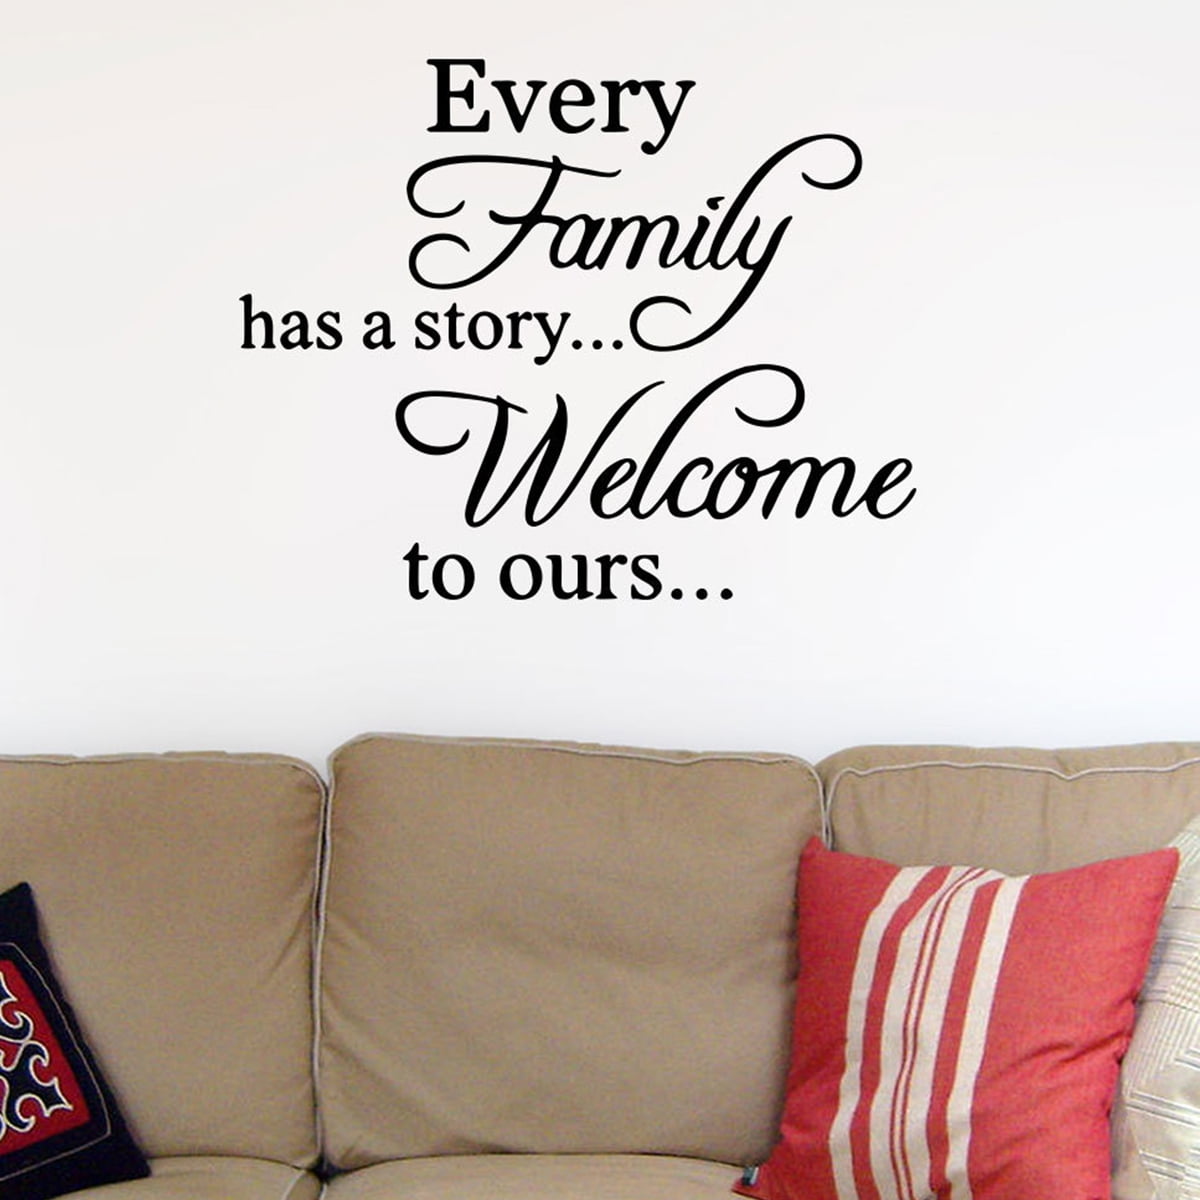 EVERY FAMILY HAS A STORY WELCOME TO OURS Wall Art Decal Words Decor Quote 